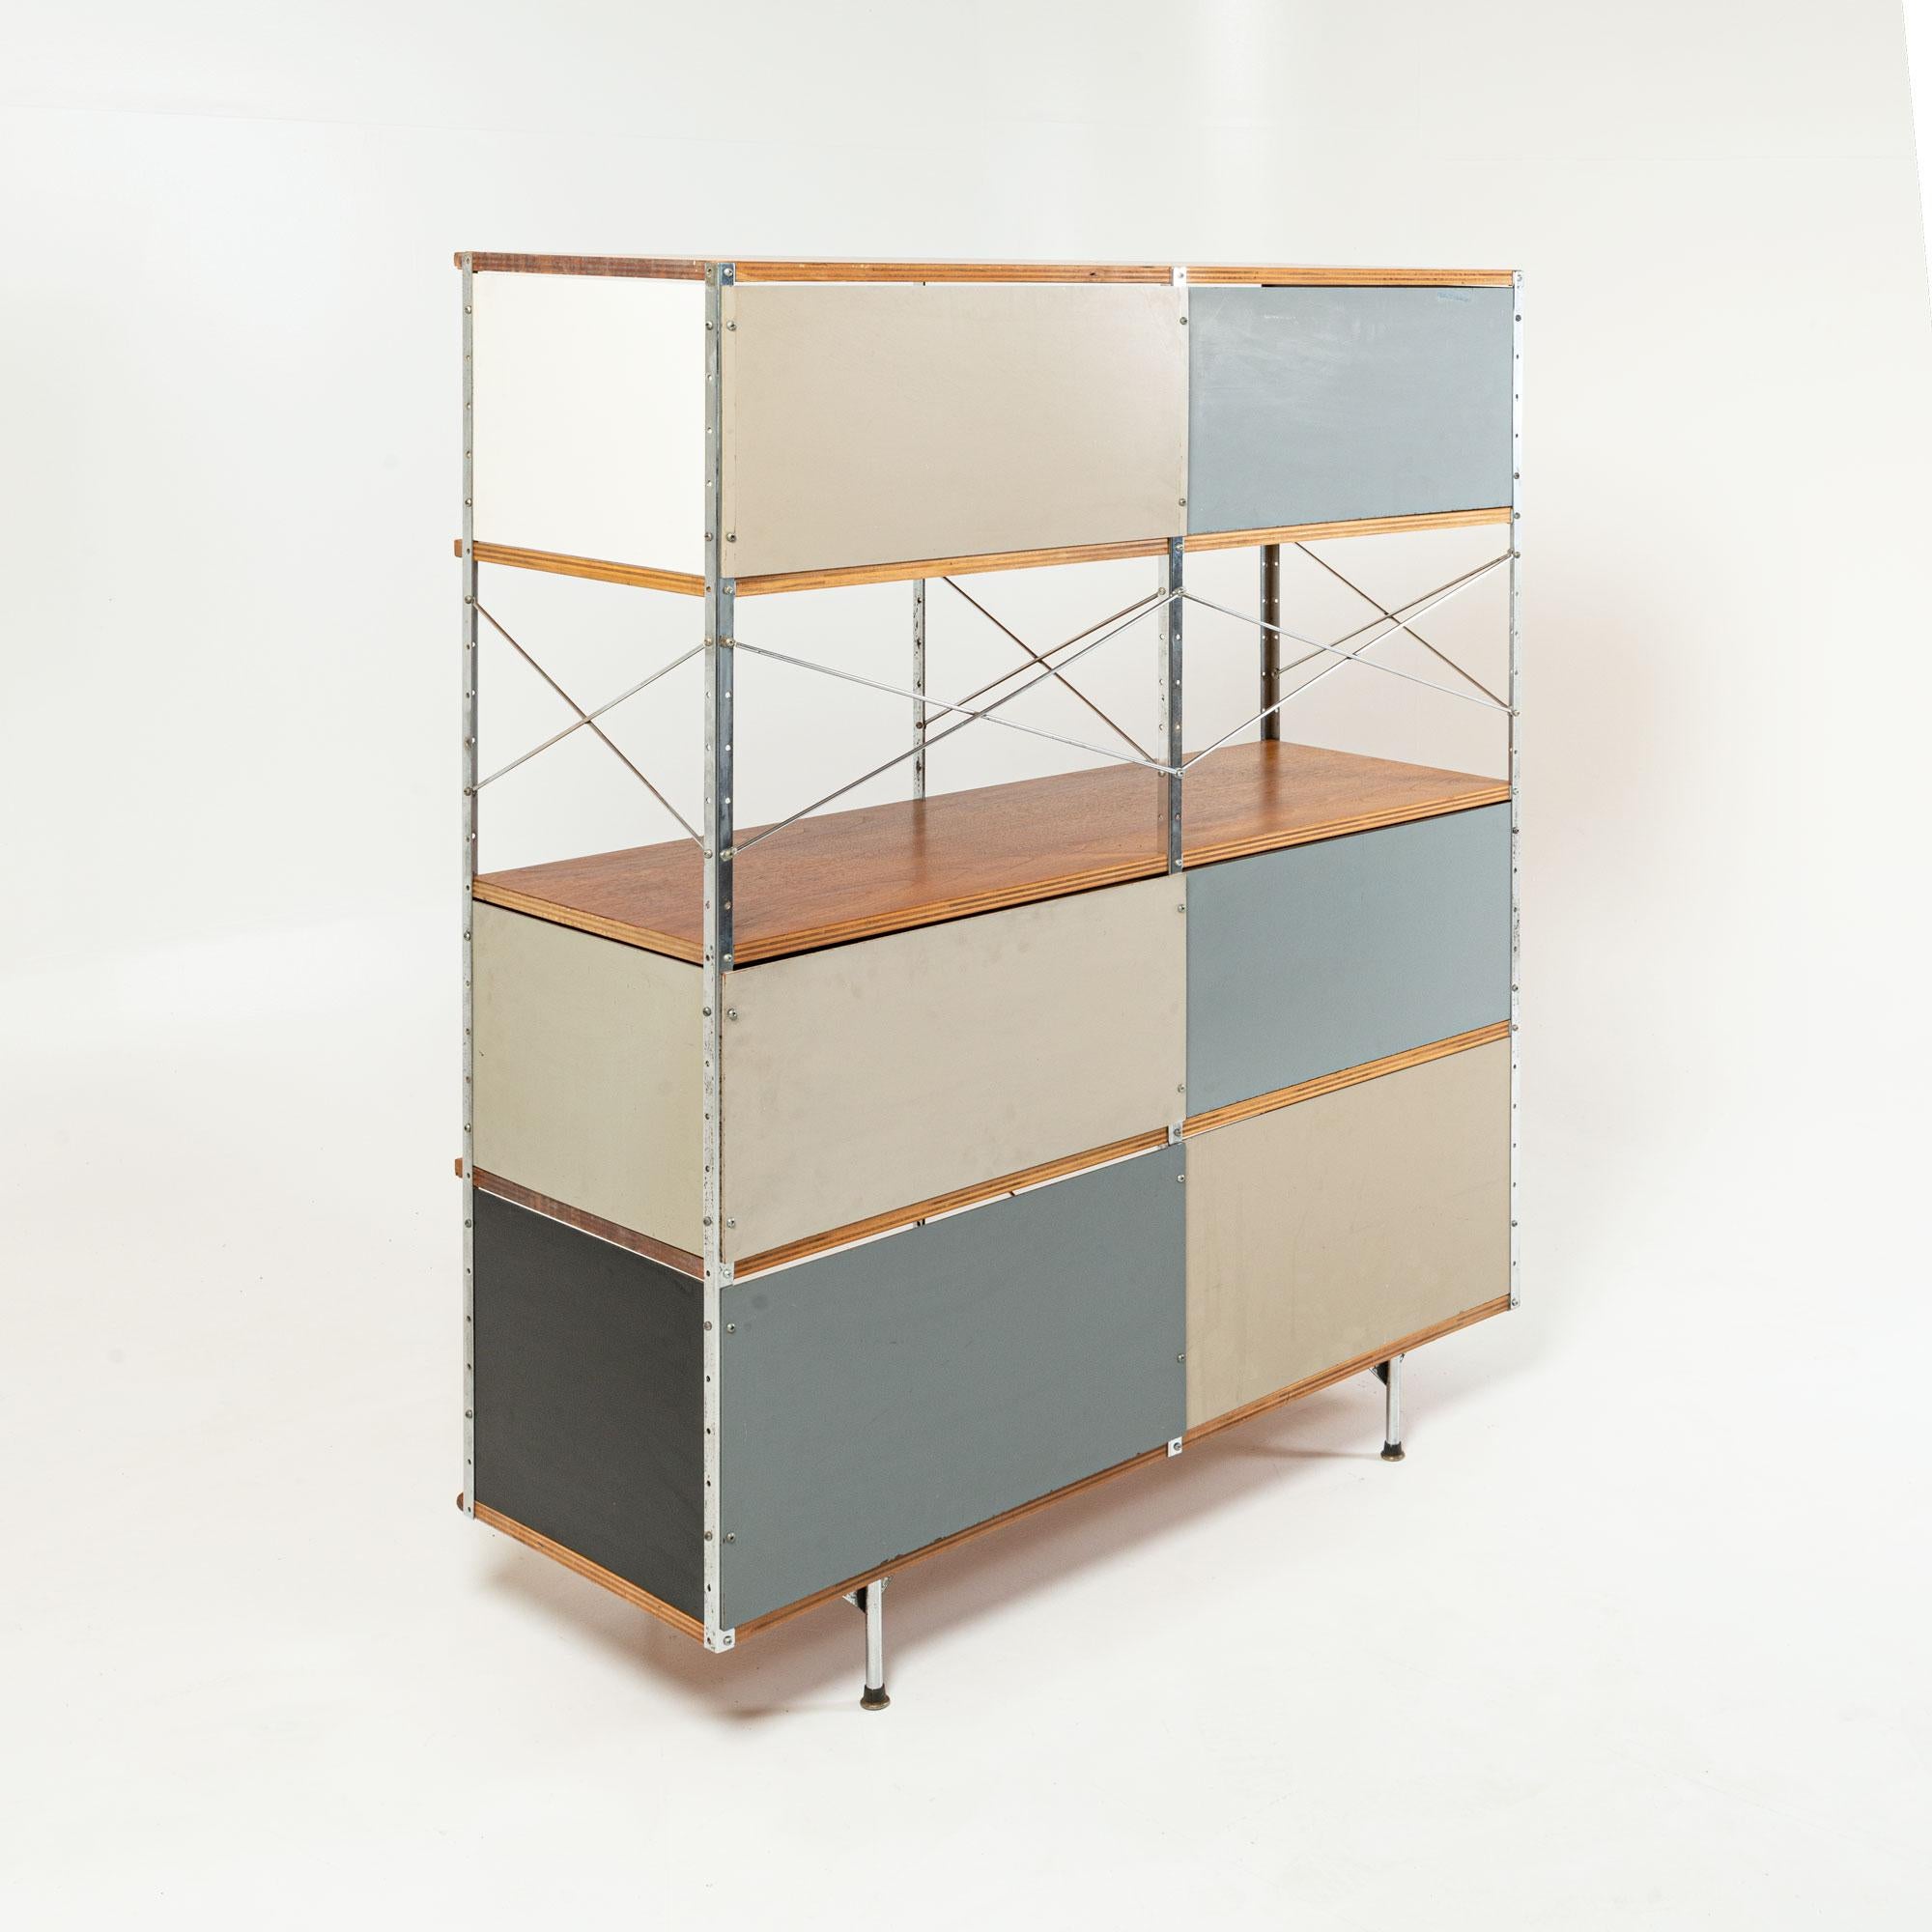 Second Generation Eames Storage Unit ESU 400-N series by Charles and Ray Eames 1